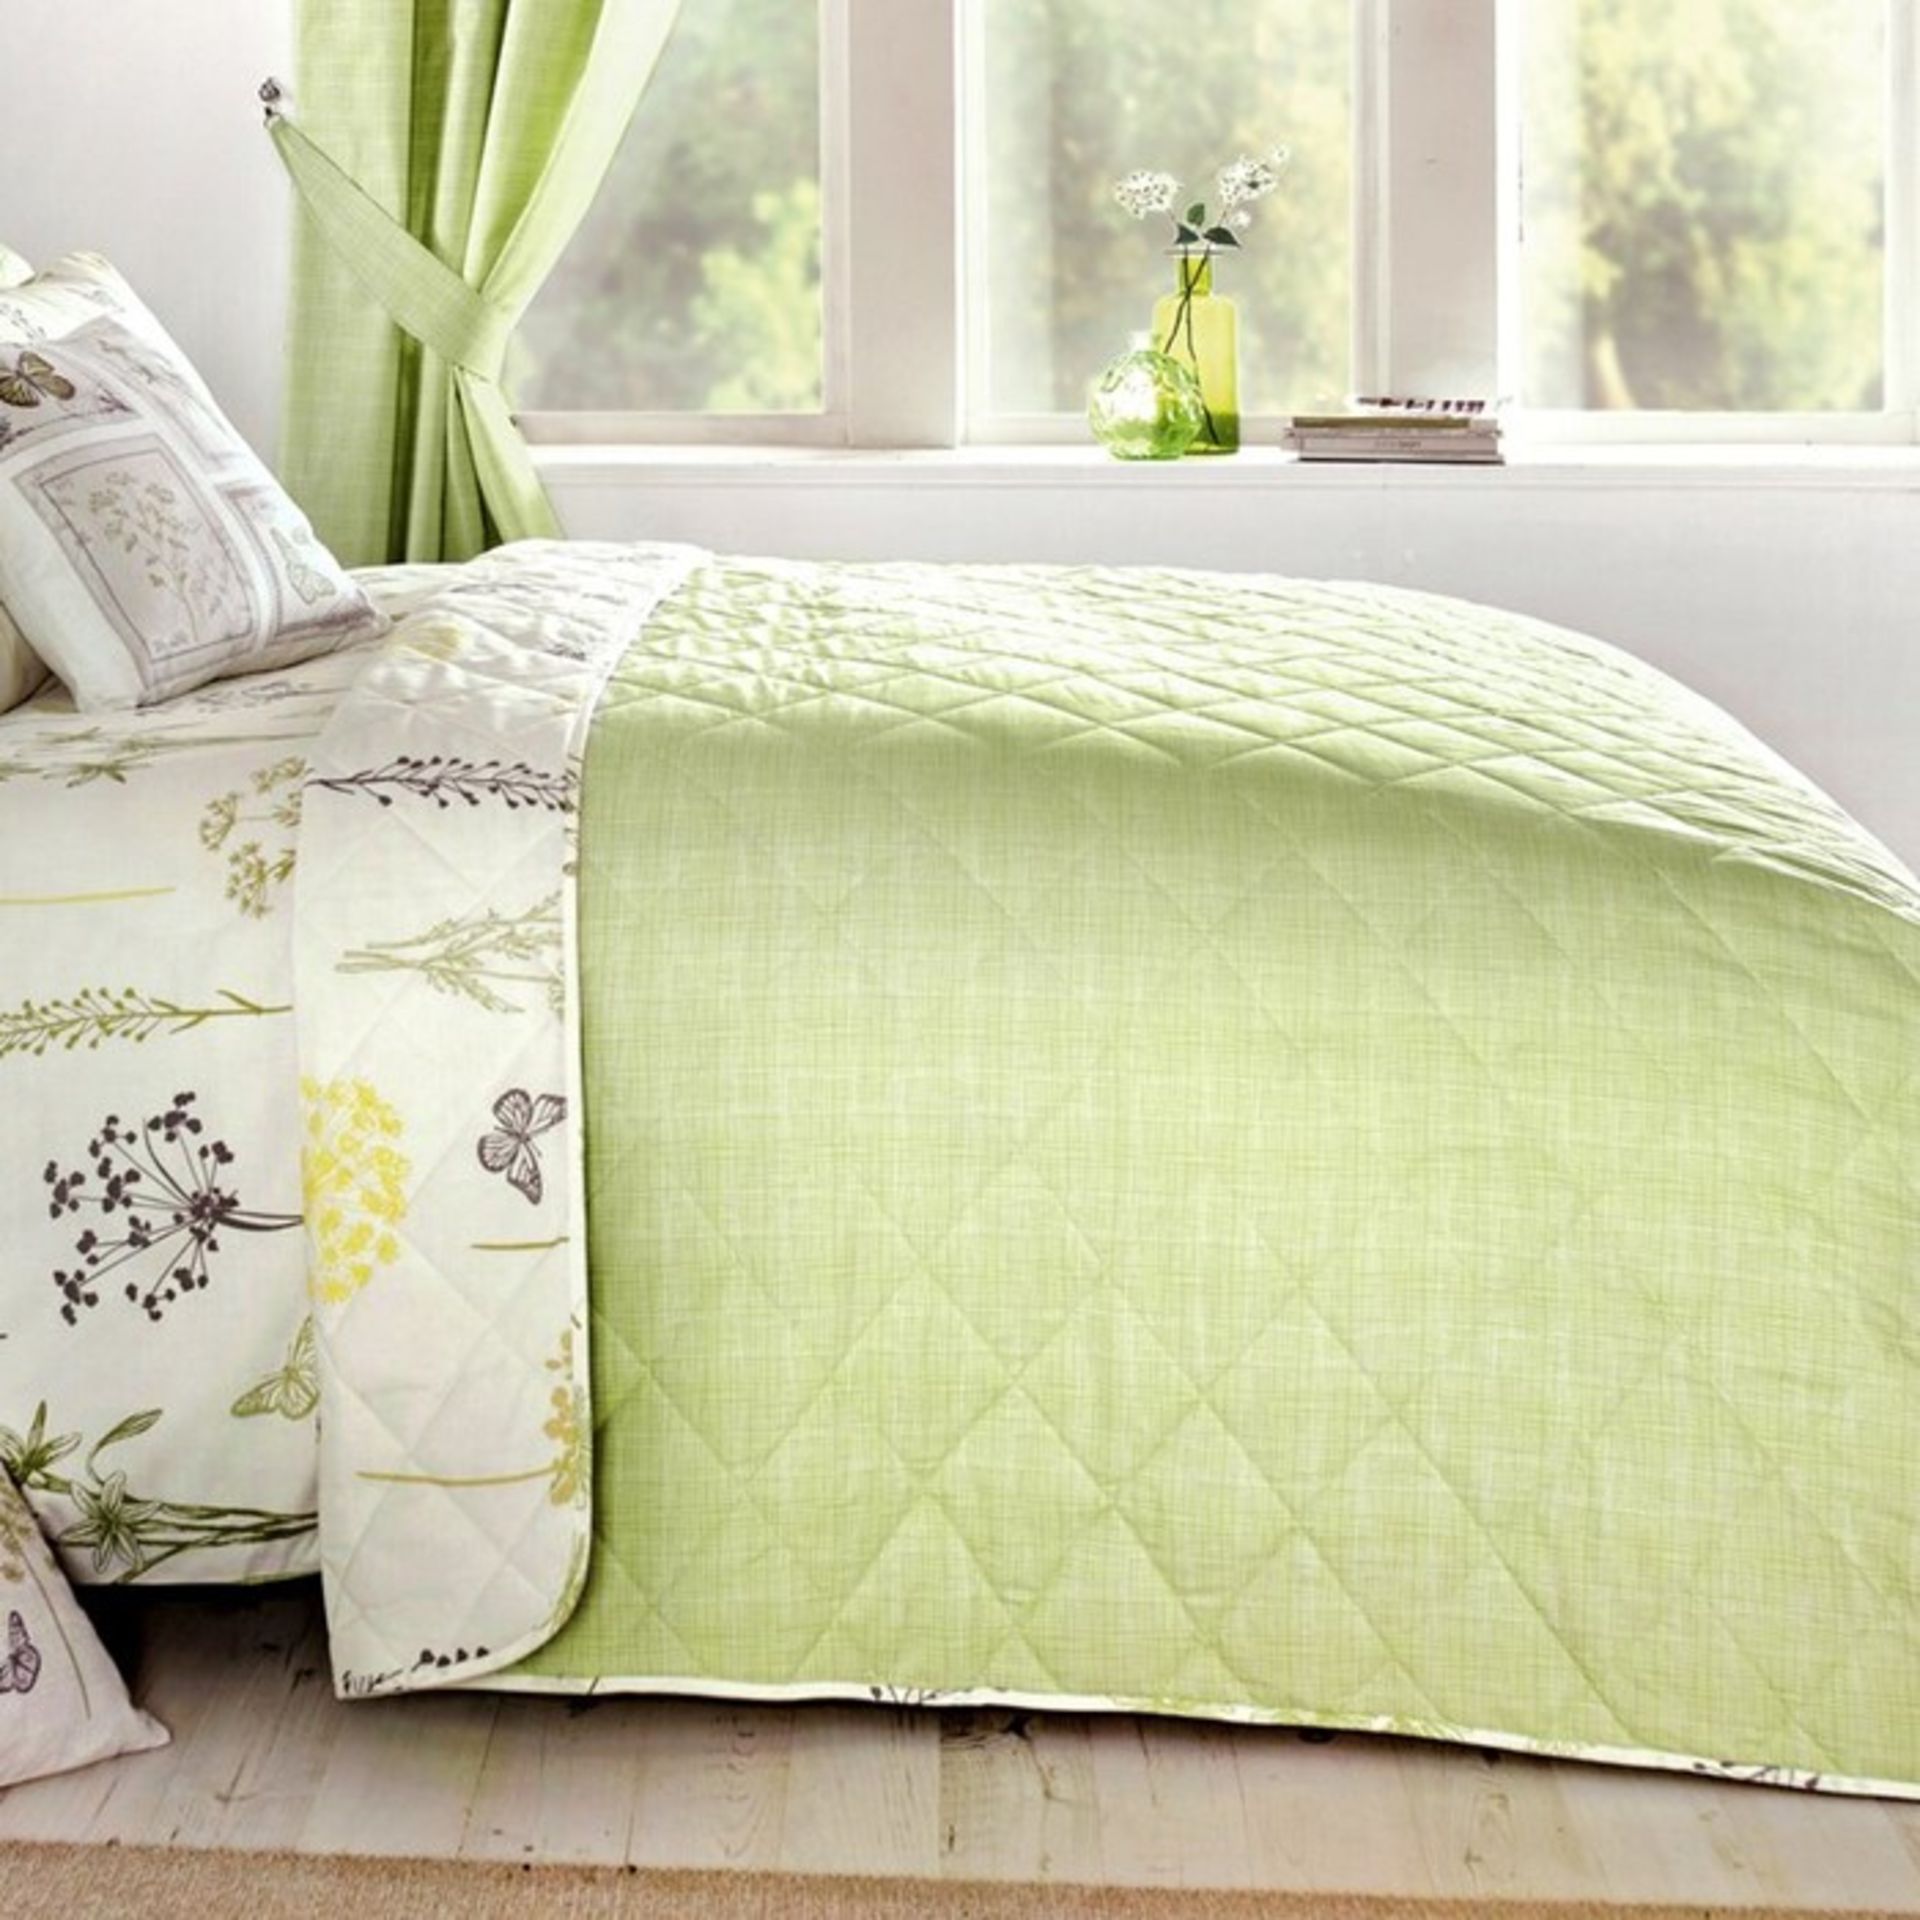 Lily Manor, Bedspread (GREEN)(168X183CM) - RRP £32.99 (HAZM6591 - 19060/201) 2E - Image 2 of 2